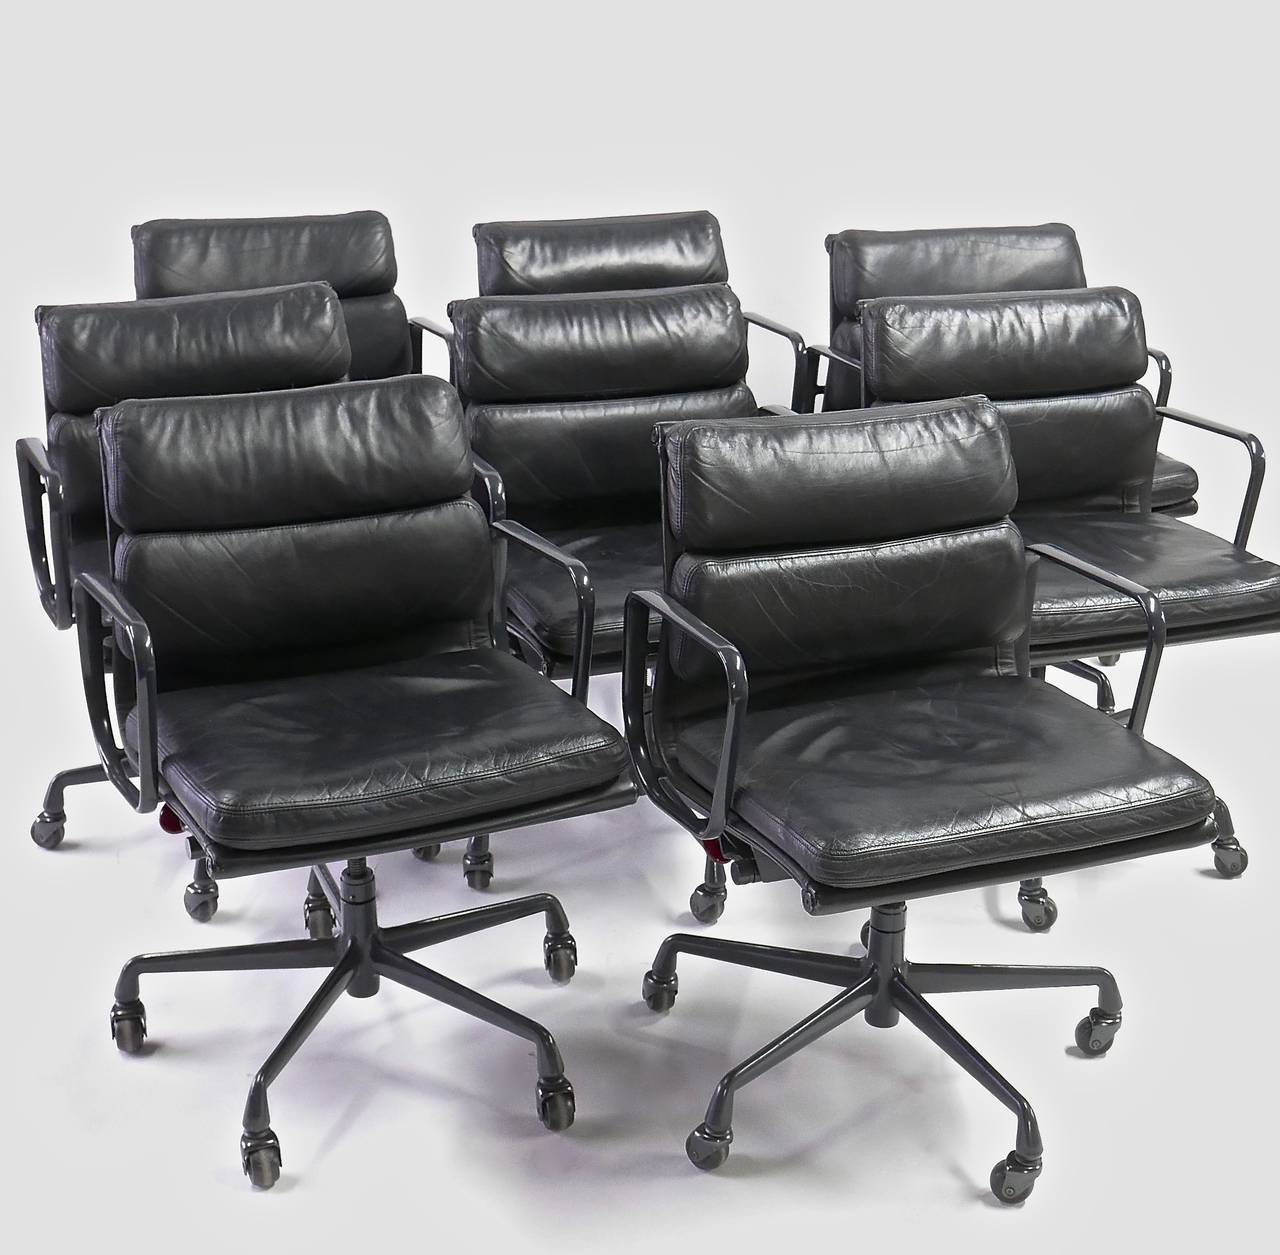 The Soft Pad chair is a design icon. This comfortable and functional set features black leather upholstery with graphite powder coated aluminum frames. The seat is height and tilt adjustable. Originally designed in 1969 this matching group is from